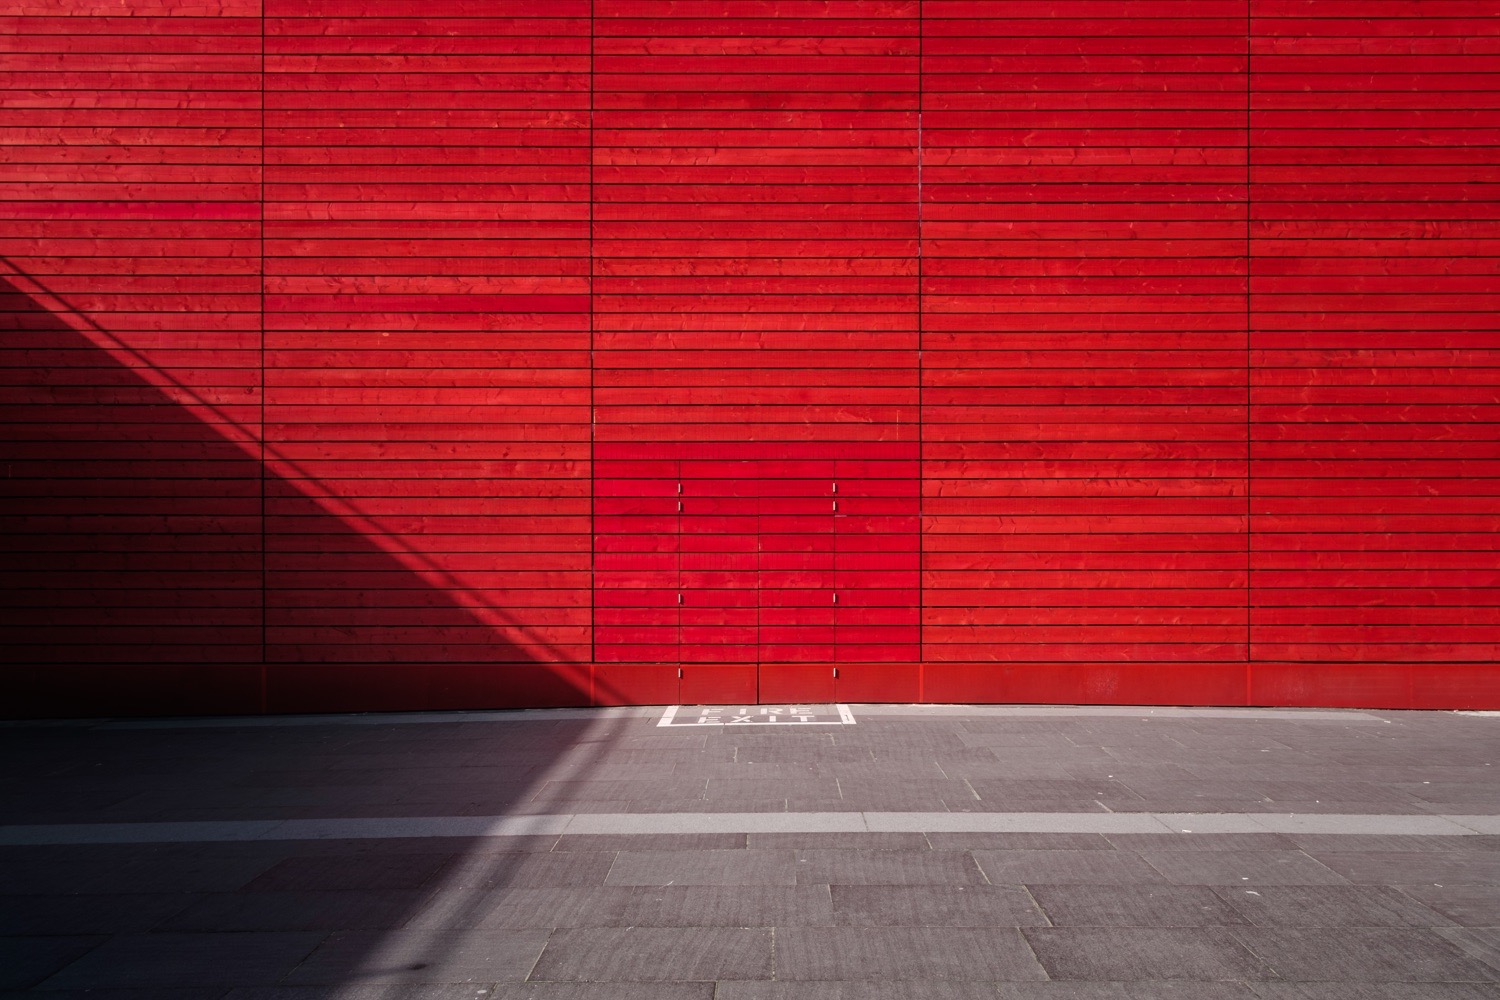 Red walls in the carpark